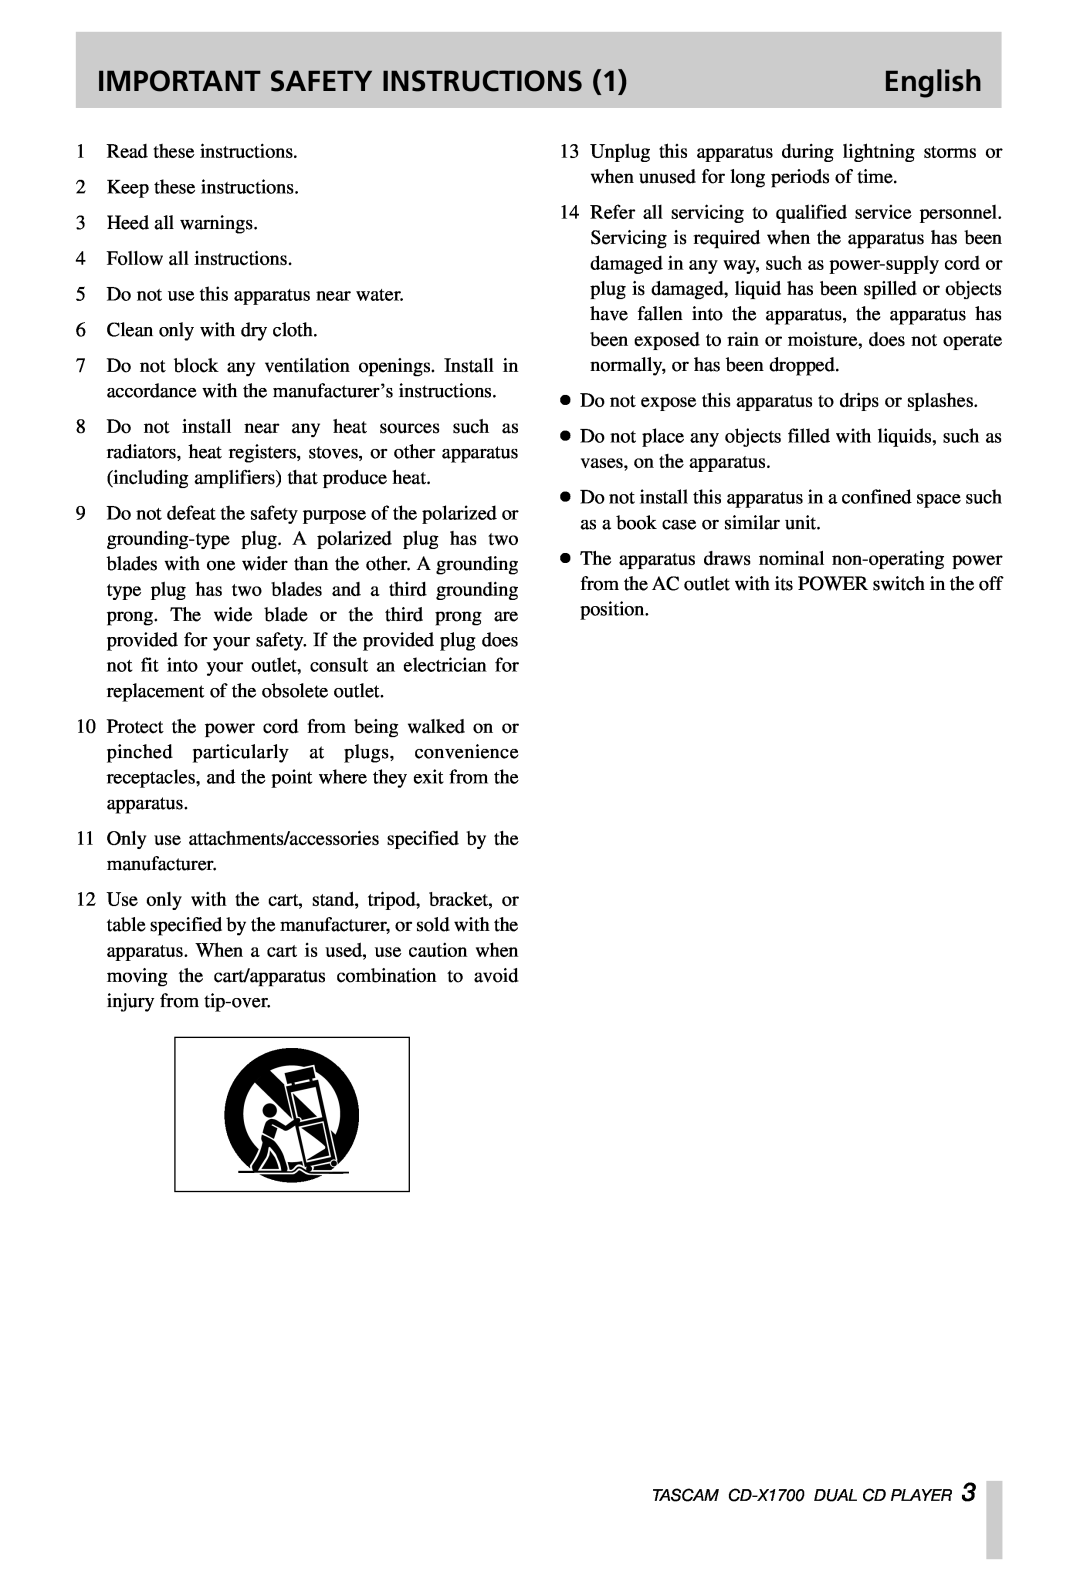 Tascam CD-X1700 owner manual Important Safety Instructions, English 